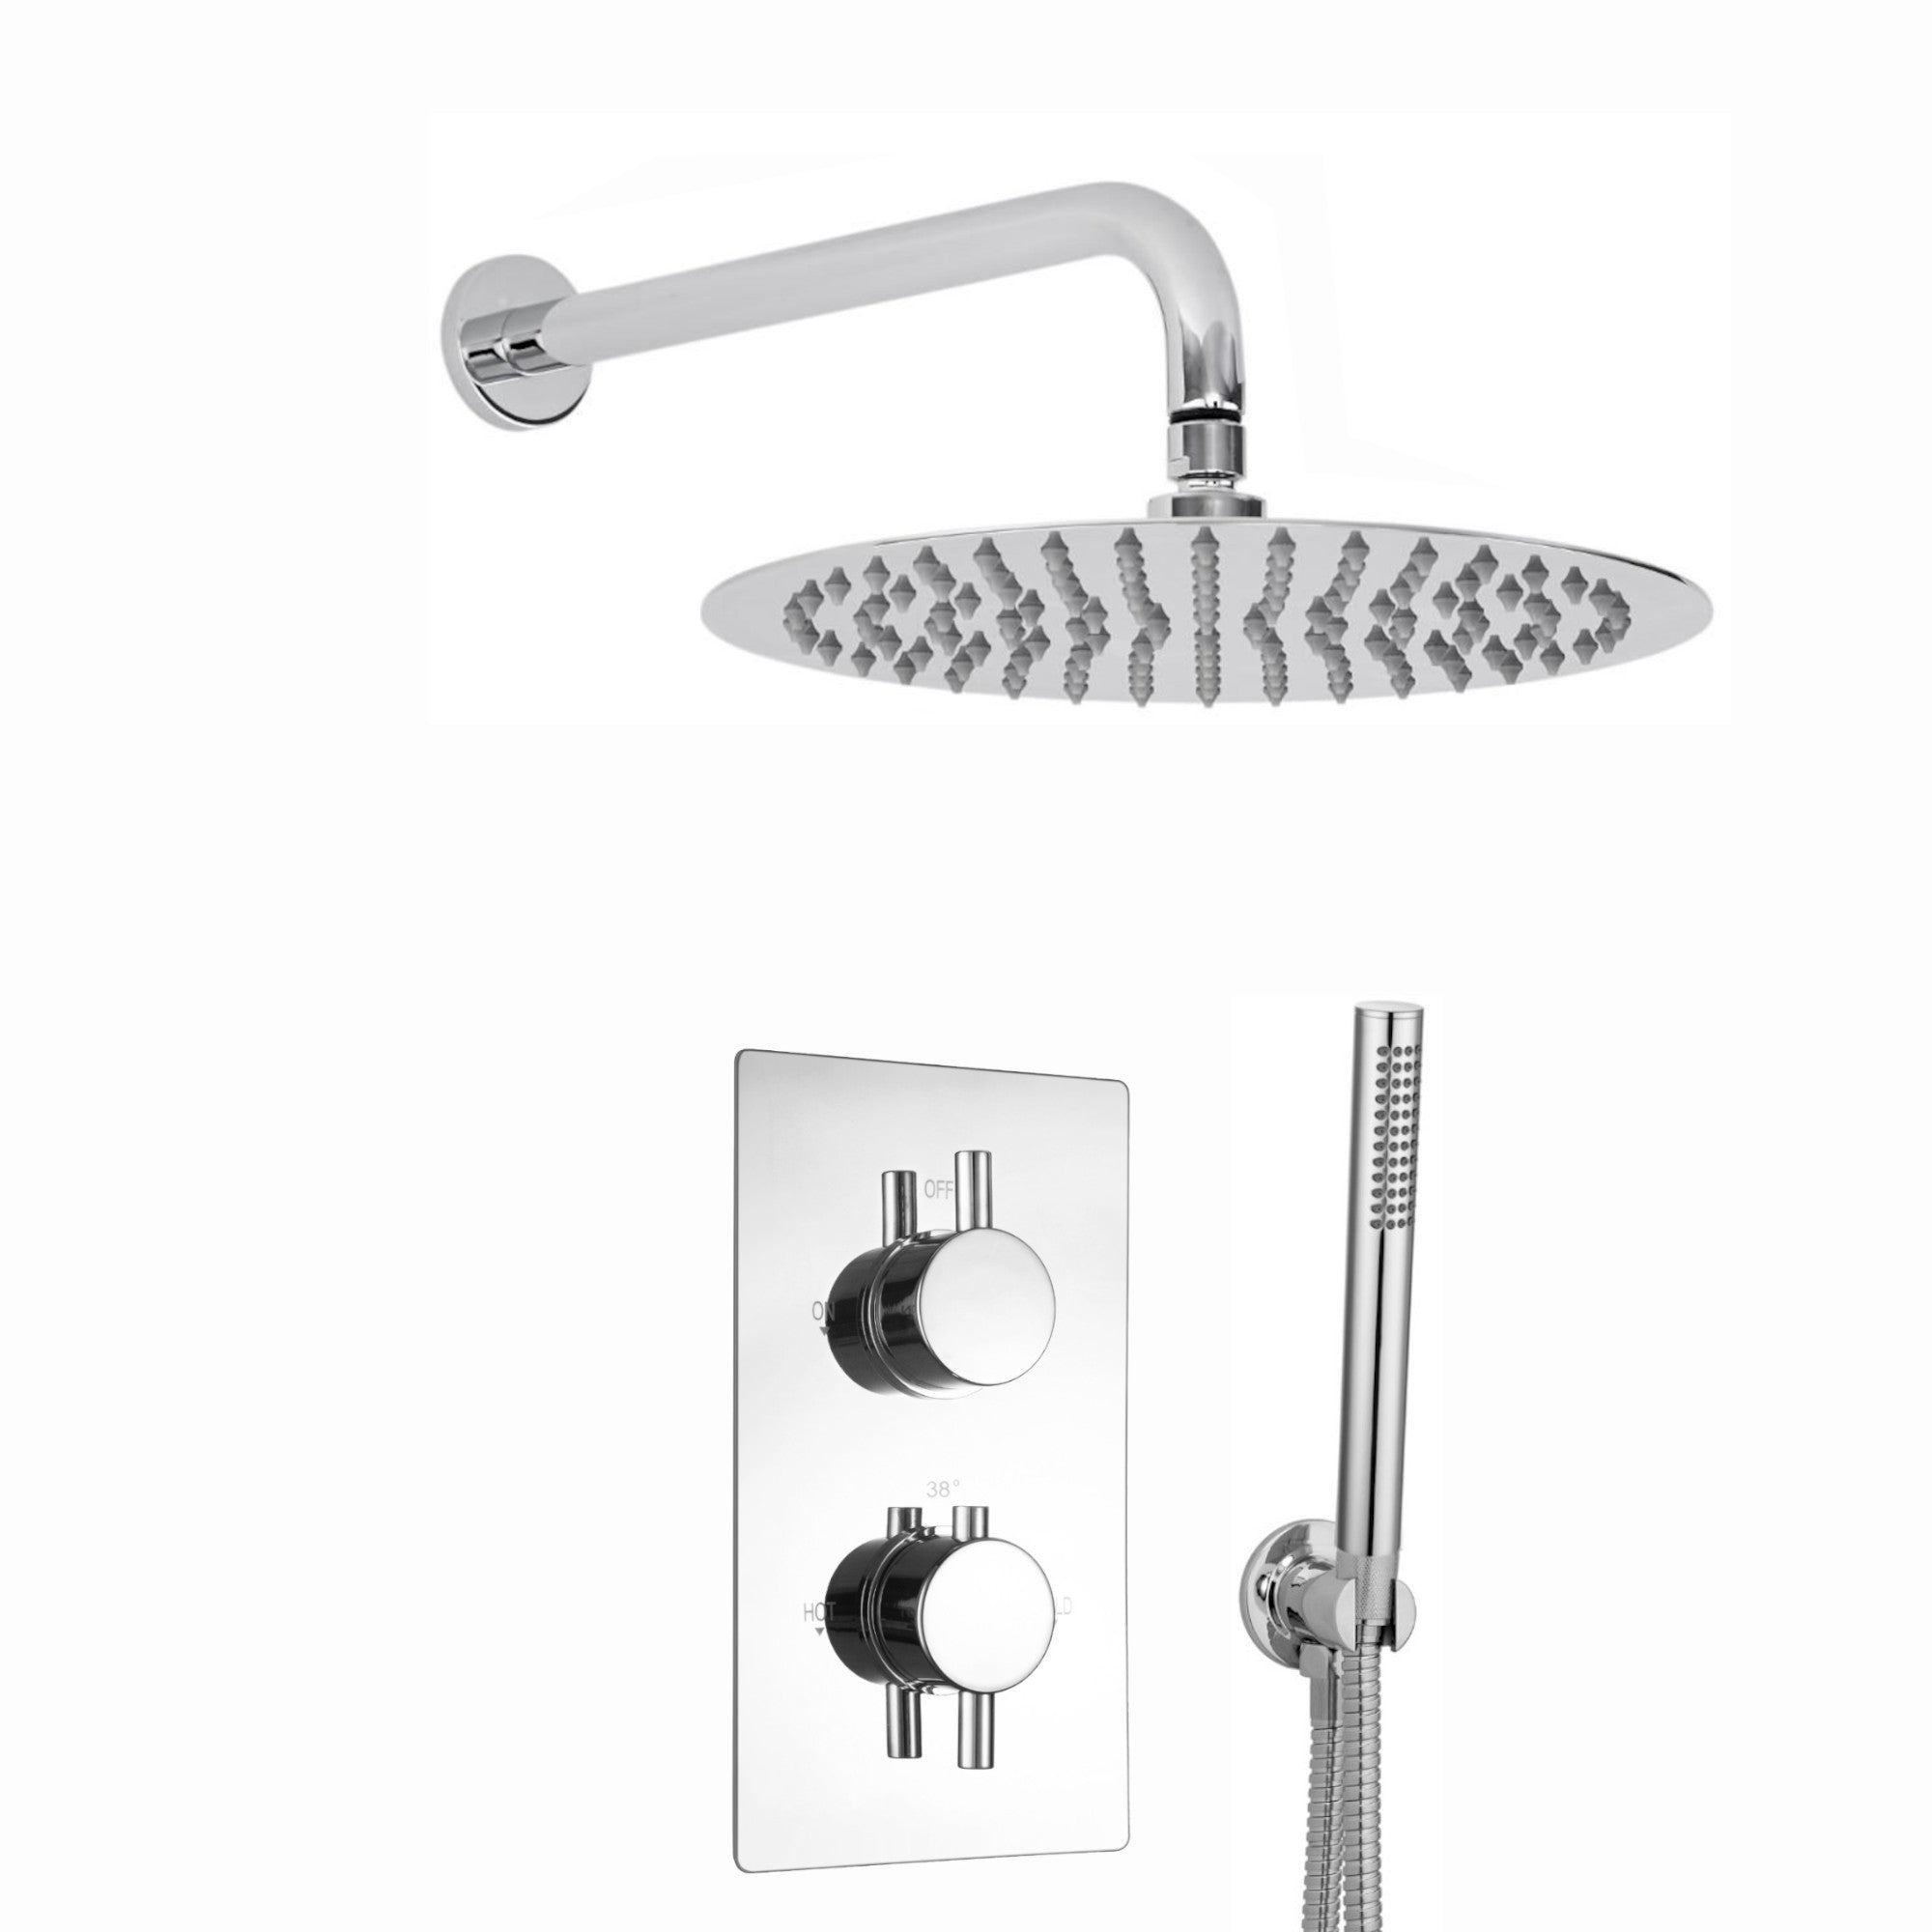 Venice Contemporary Round Concealed Thermostatic Shower Set Incl. Twin Valve, Wall Fixed 8" Shower Head, Handshower Kit - Chrome (2 Outlet)